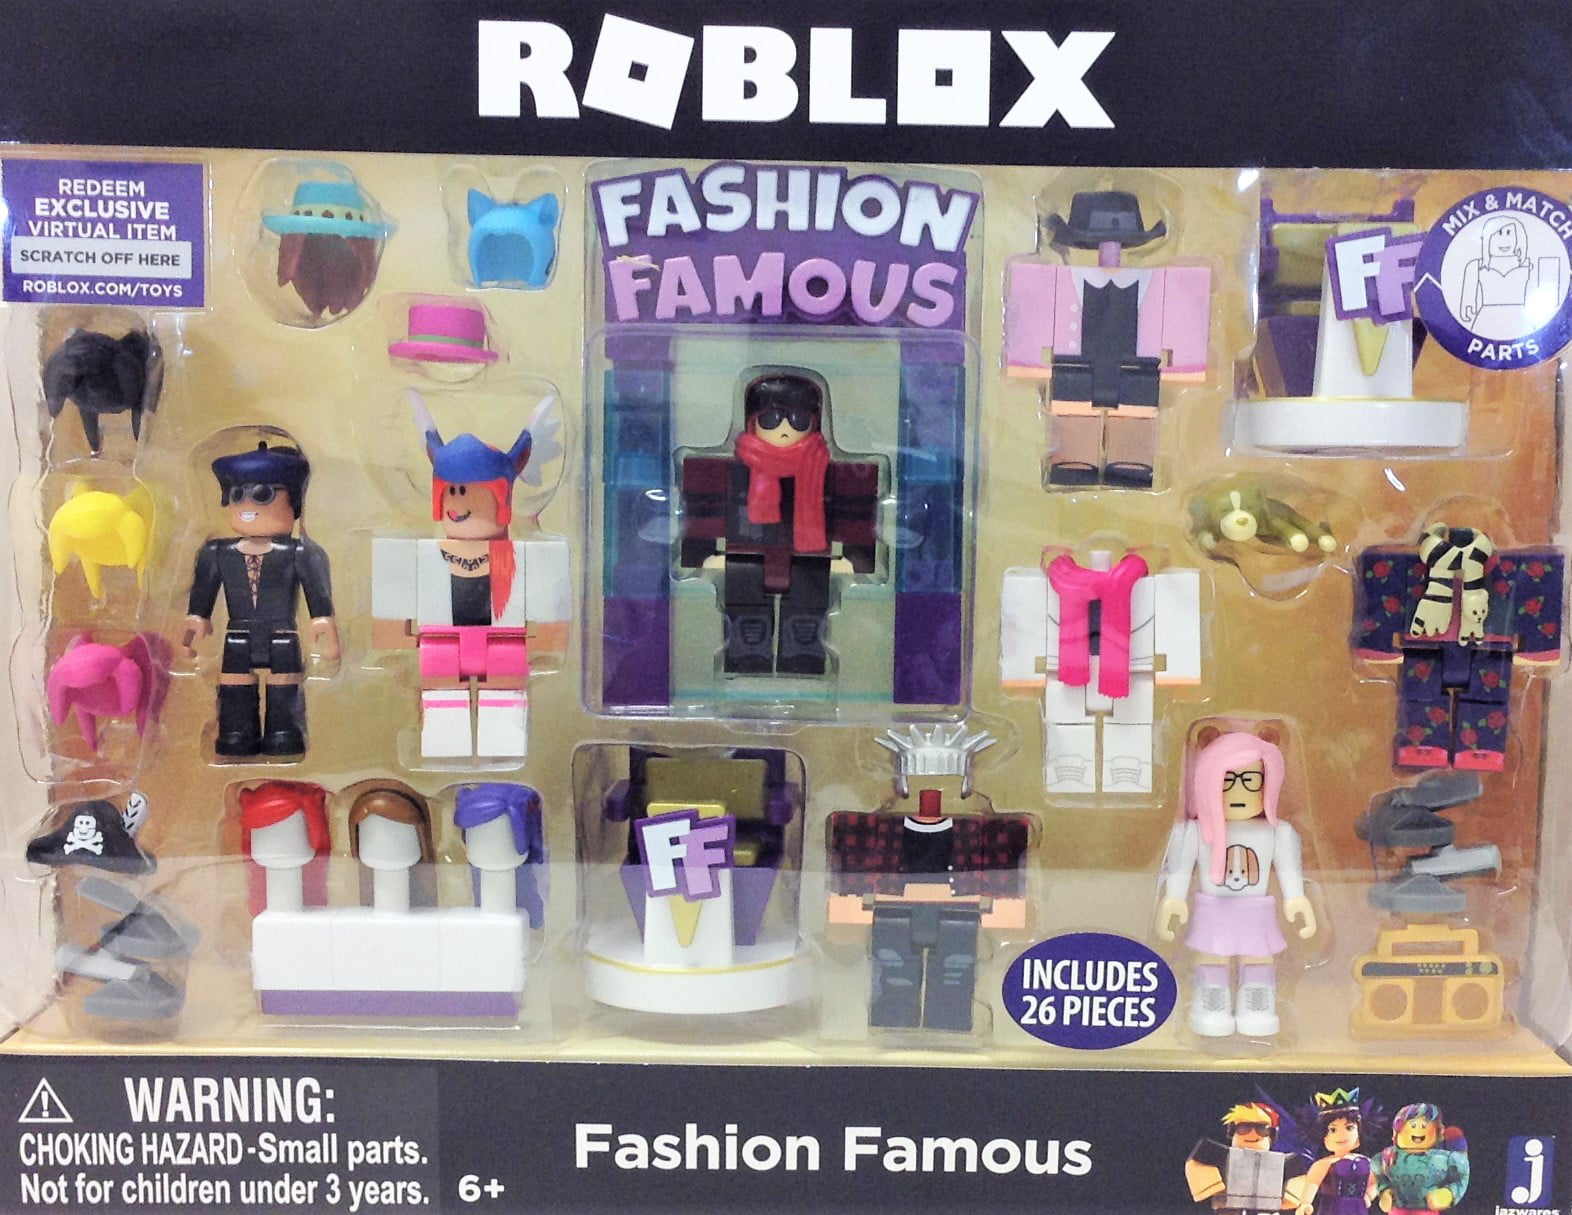 Roblox Celebrity Fashion Famous Feature Playset - toys roblox sets